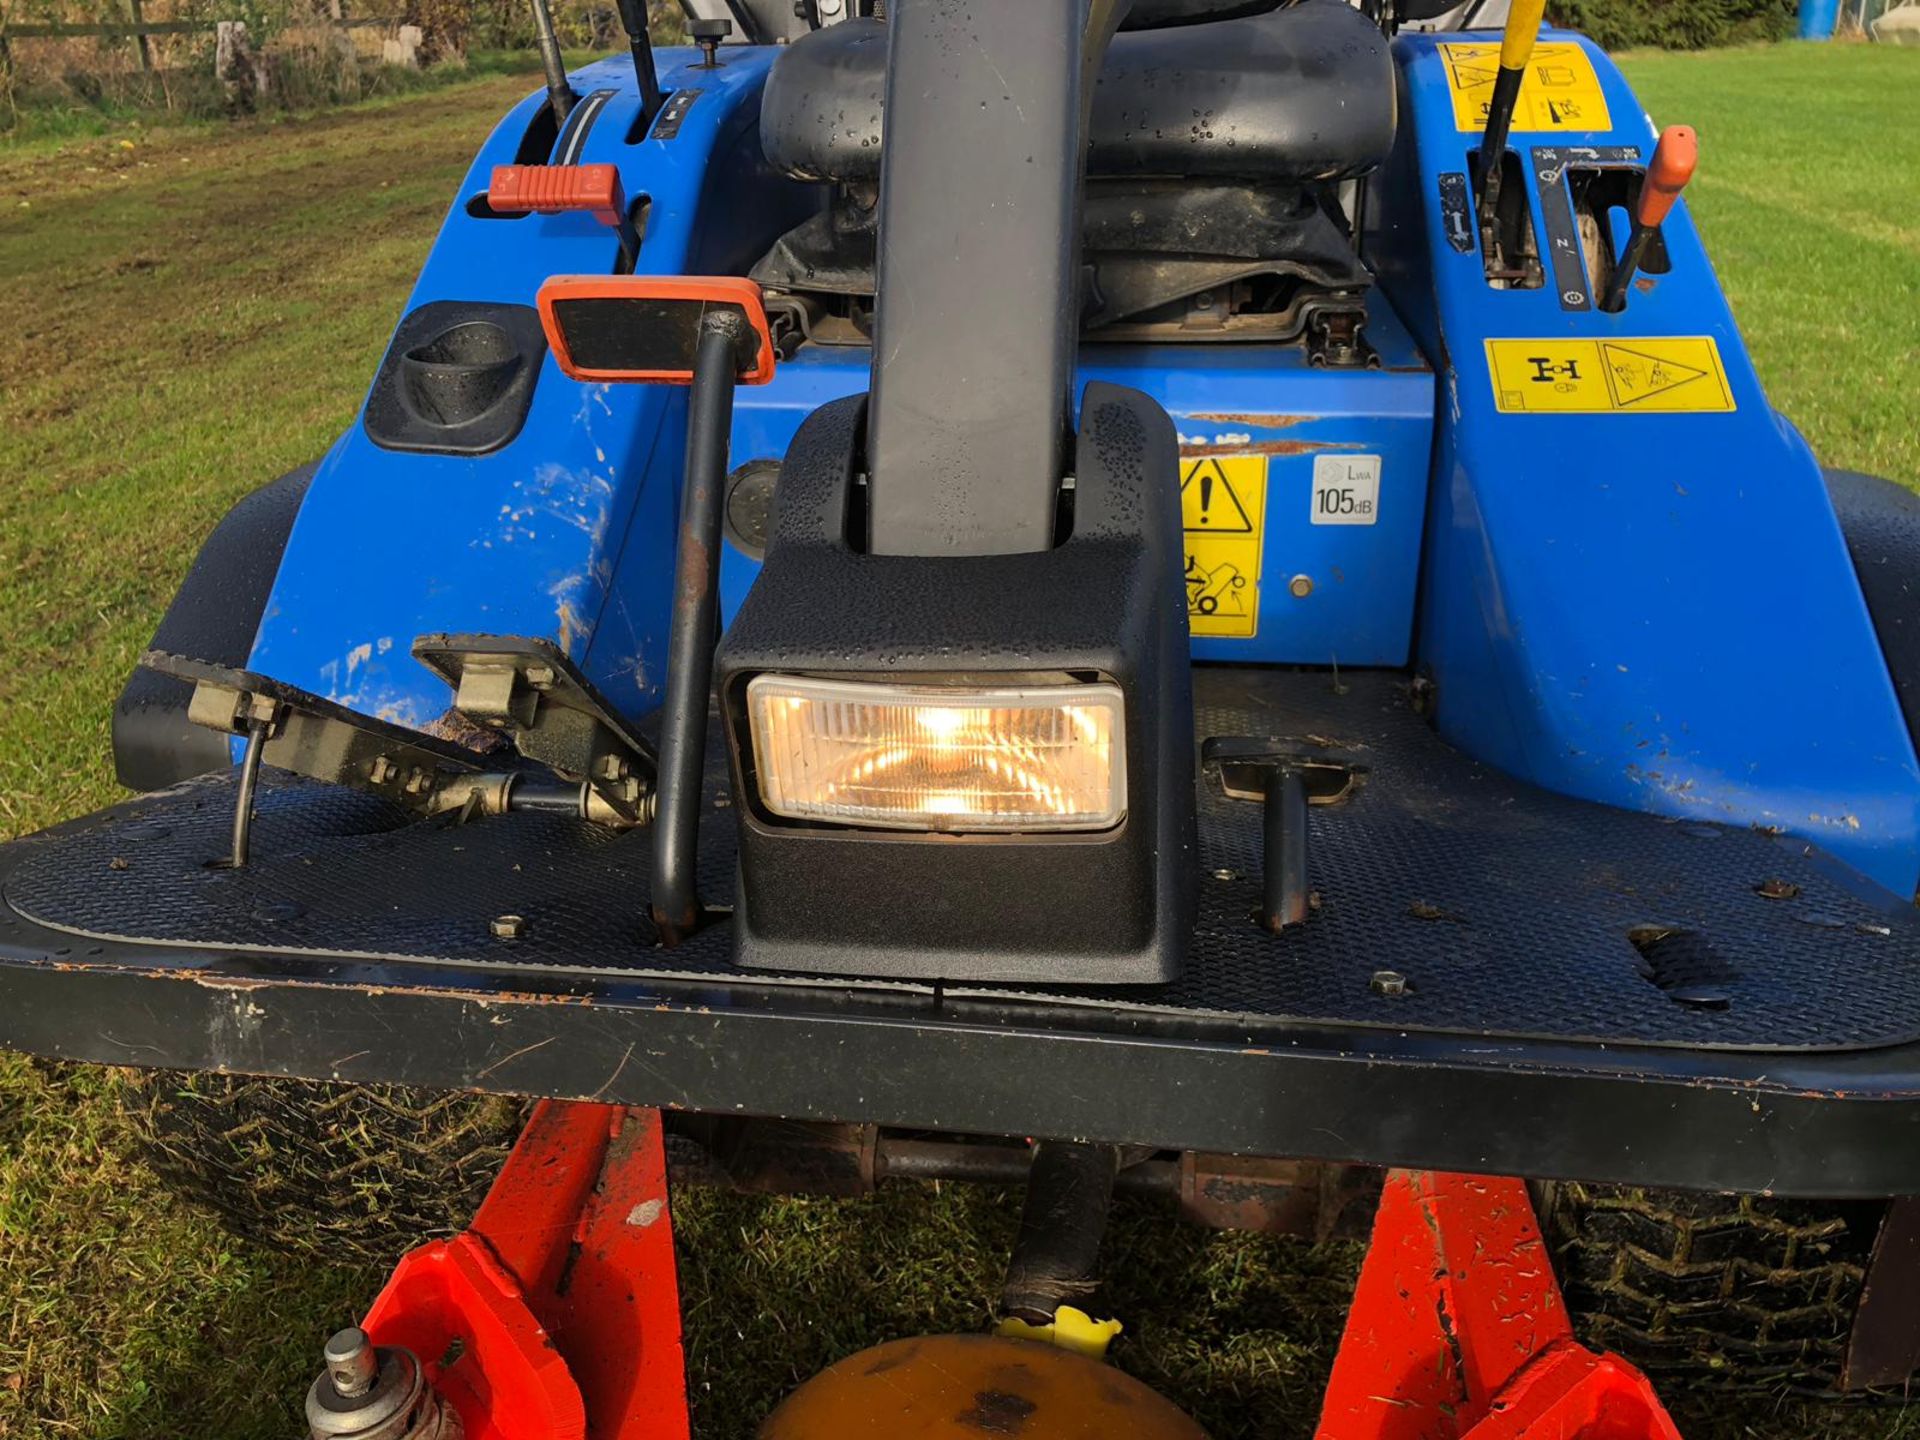 2010/60 REG NEW HOLLAND MC35 4WD RIDE ON LAWN MOWER LOW HOURS *PLUS VAT* - Image 8 of 21